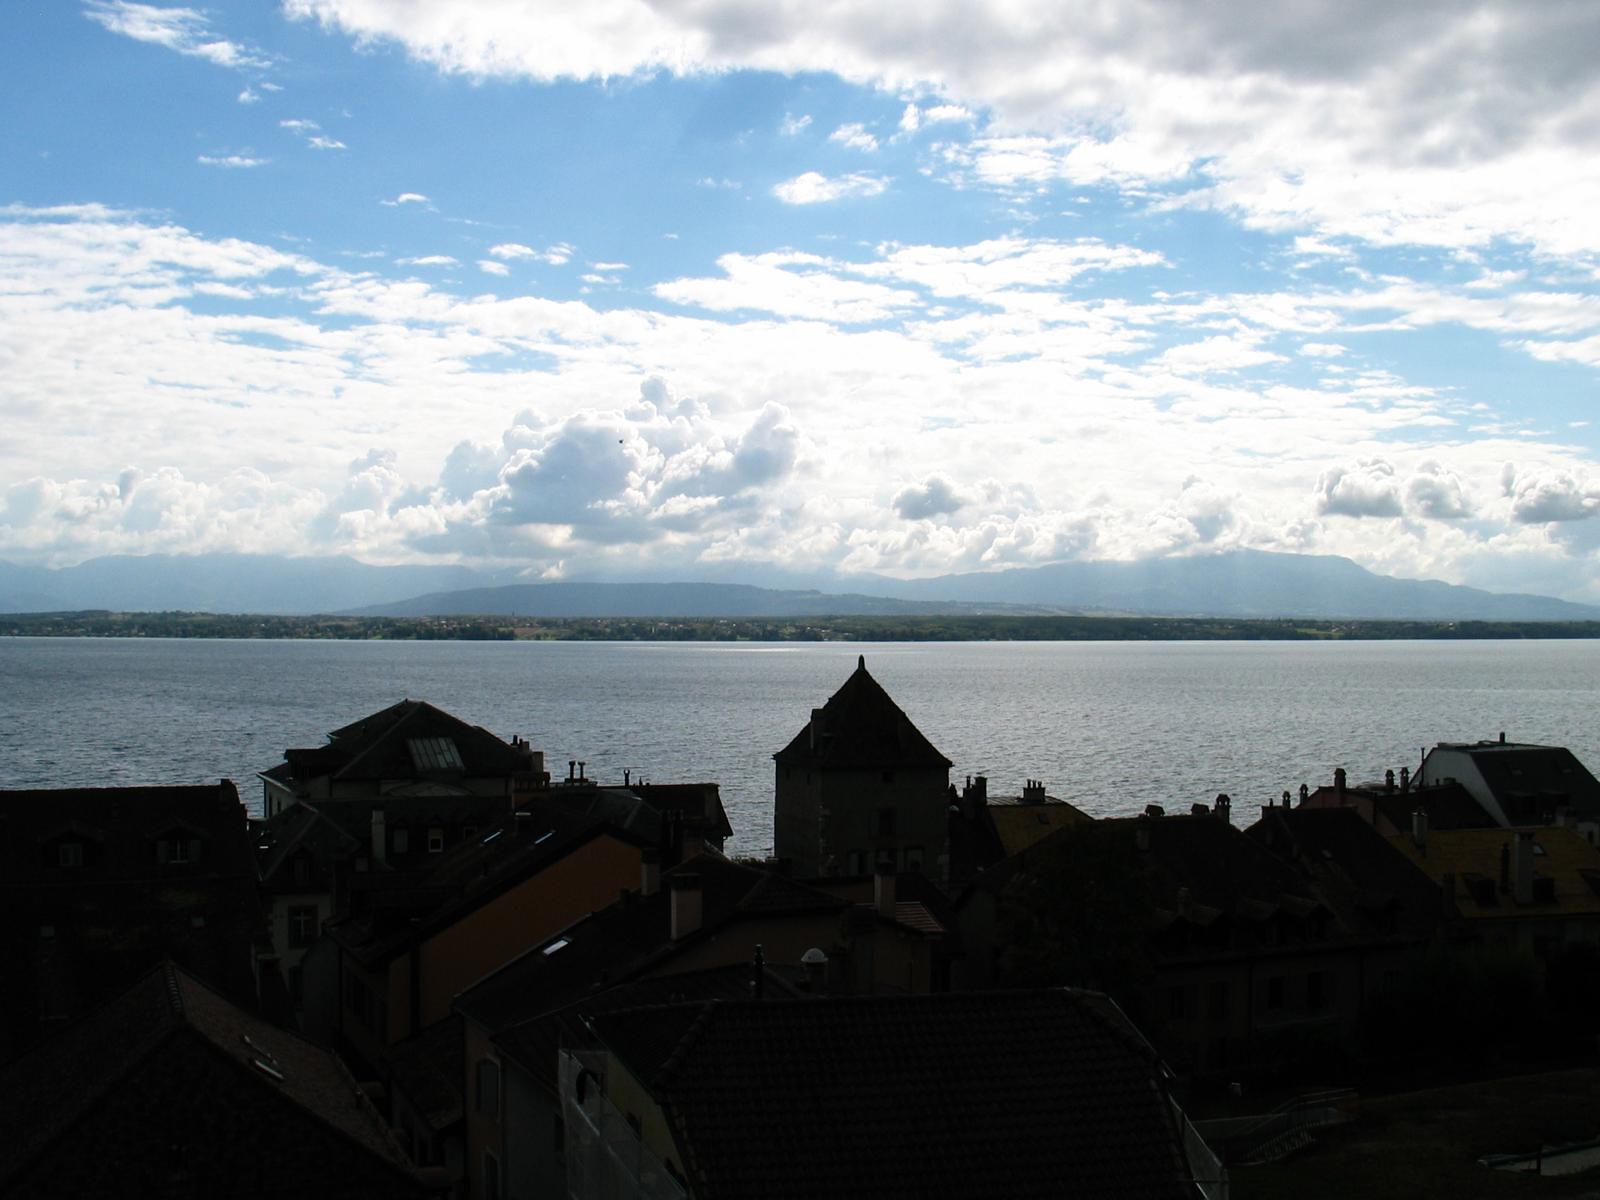 The view from the castle